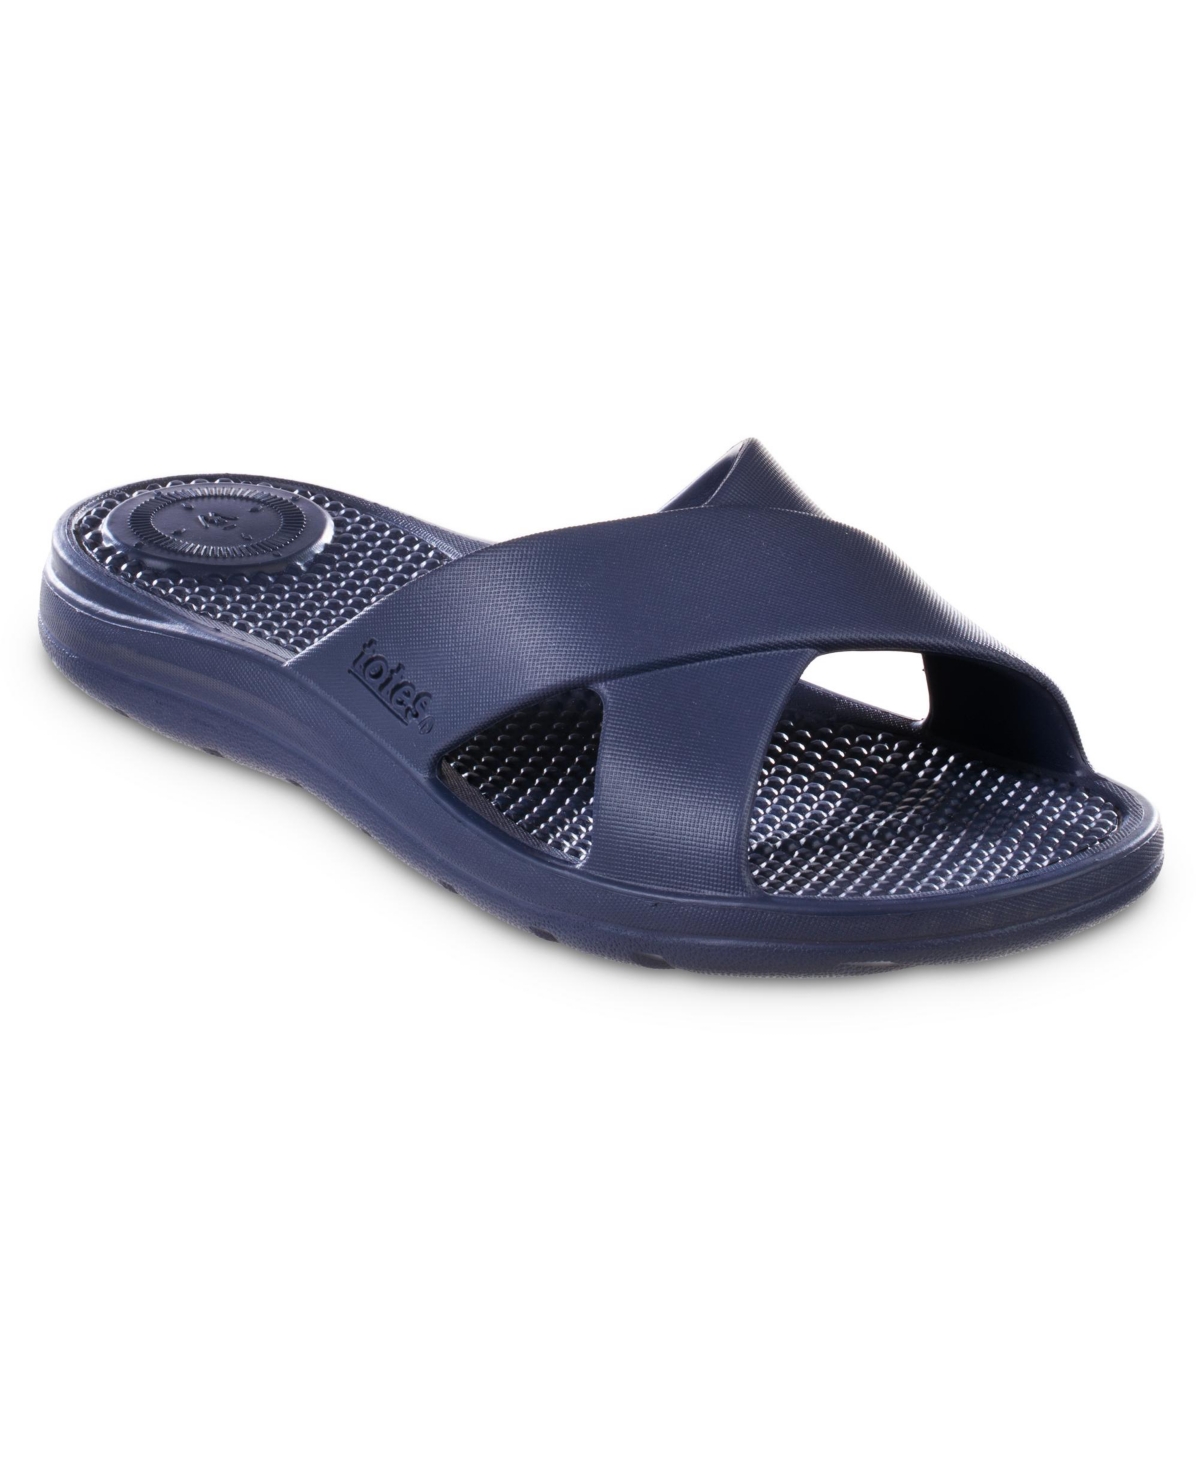 Totes Women's Molded Cross Slide Sandals With Everywear In Navy Blue